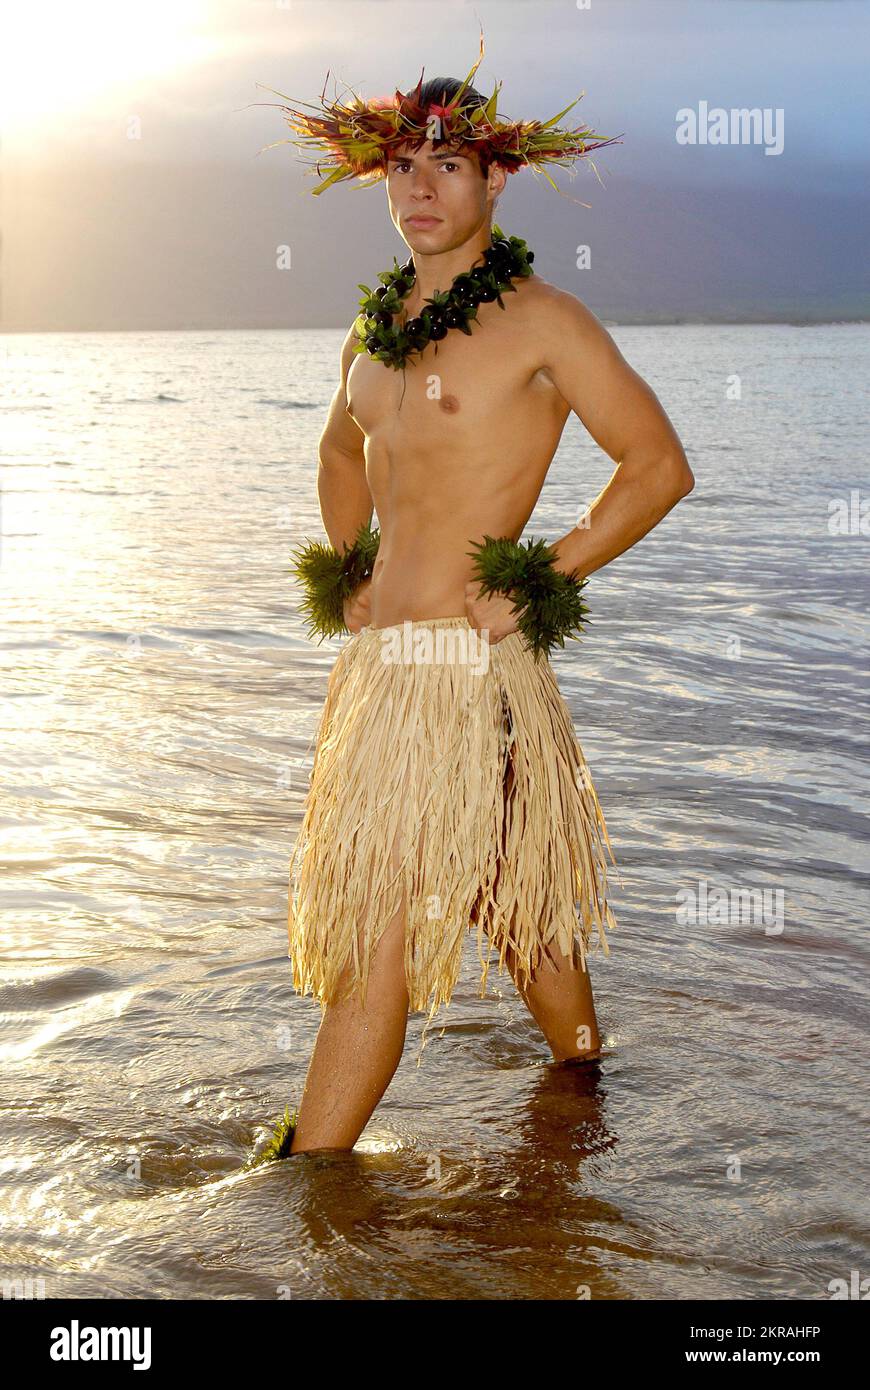 Handsome Male Hula Dancer stands in the shallow part of the ocean as the sun sets behind him. Stock Photo